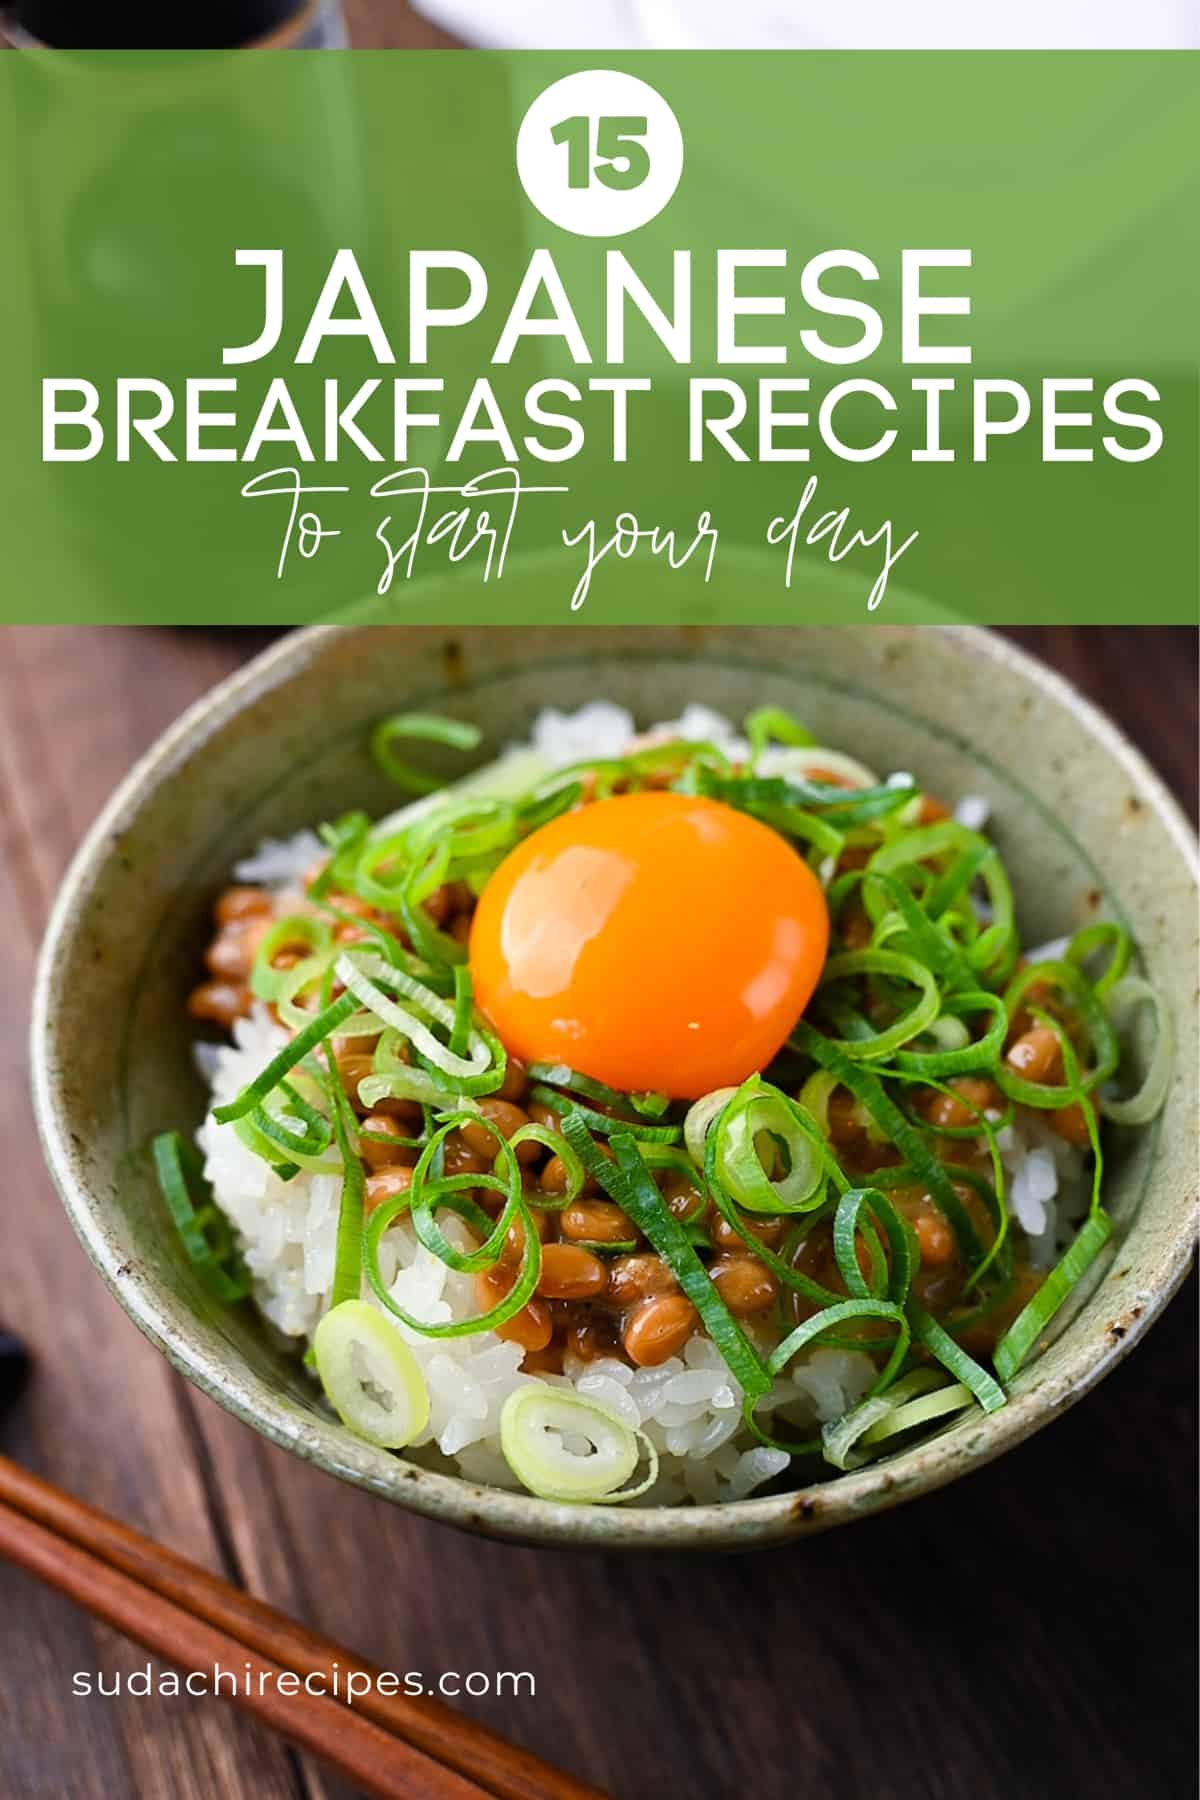 Japanese breakfast recipes with natto on rice with egg yolk featured image